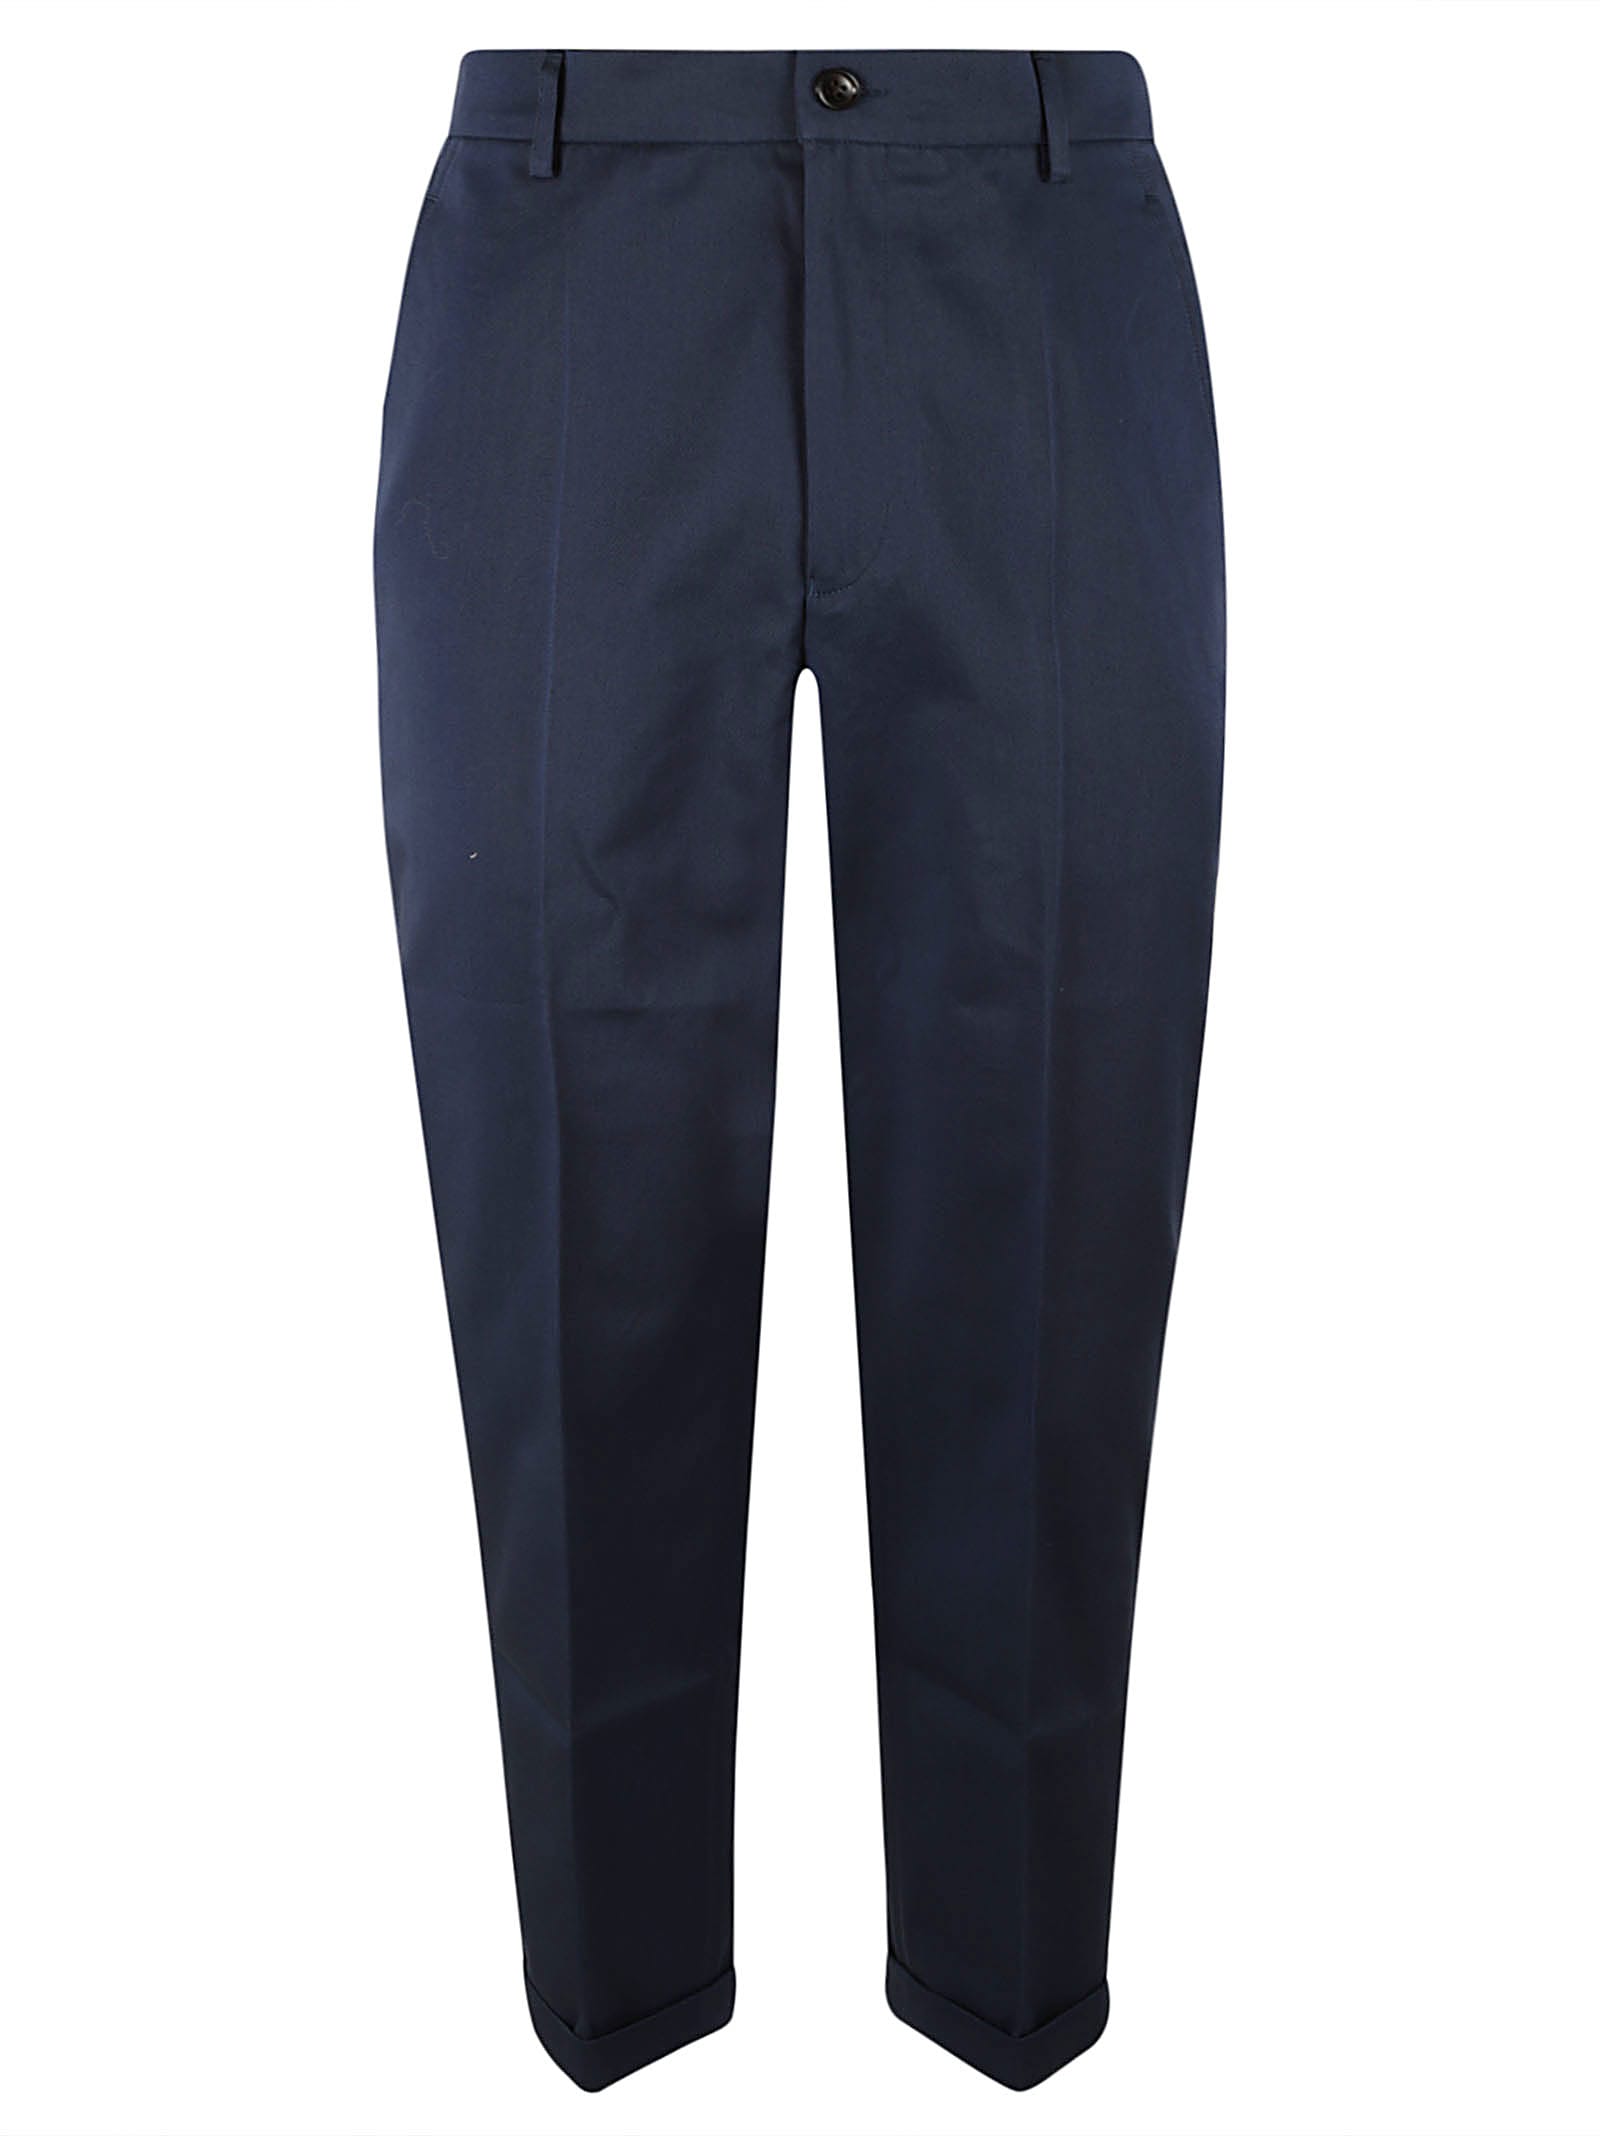 Kenzo Classic Plain Trousers In Navy Blue